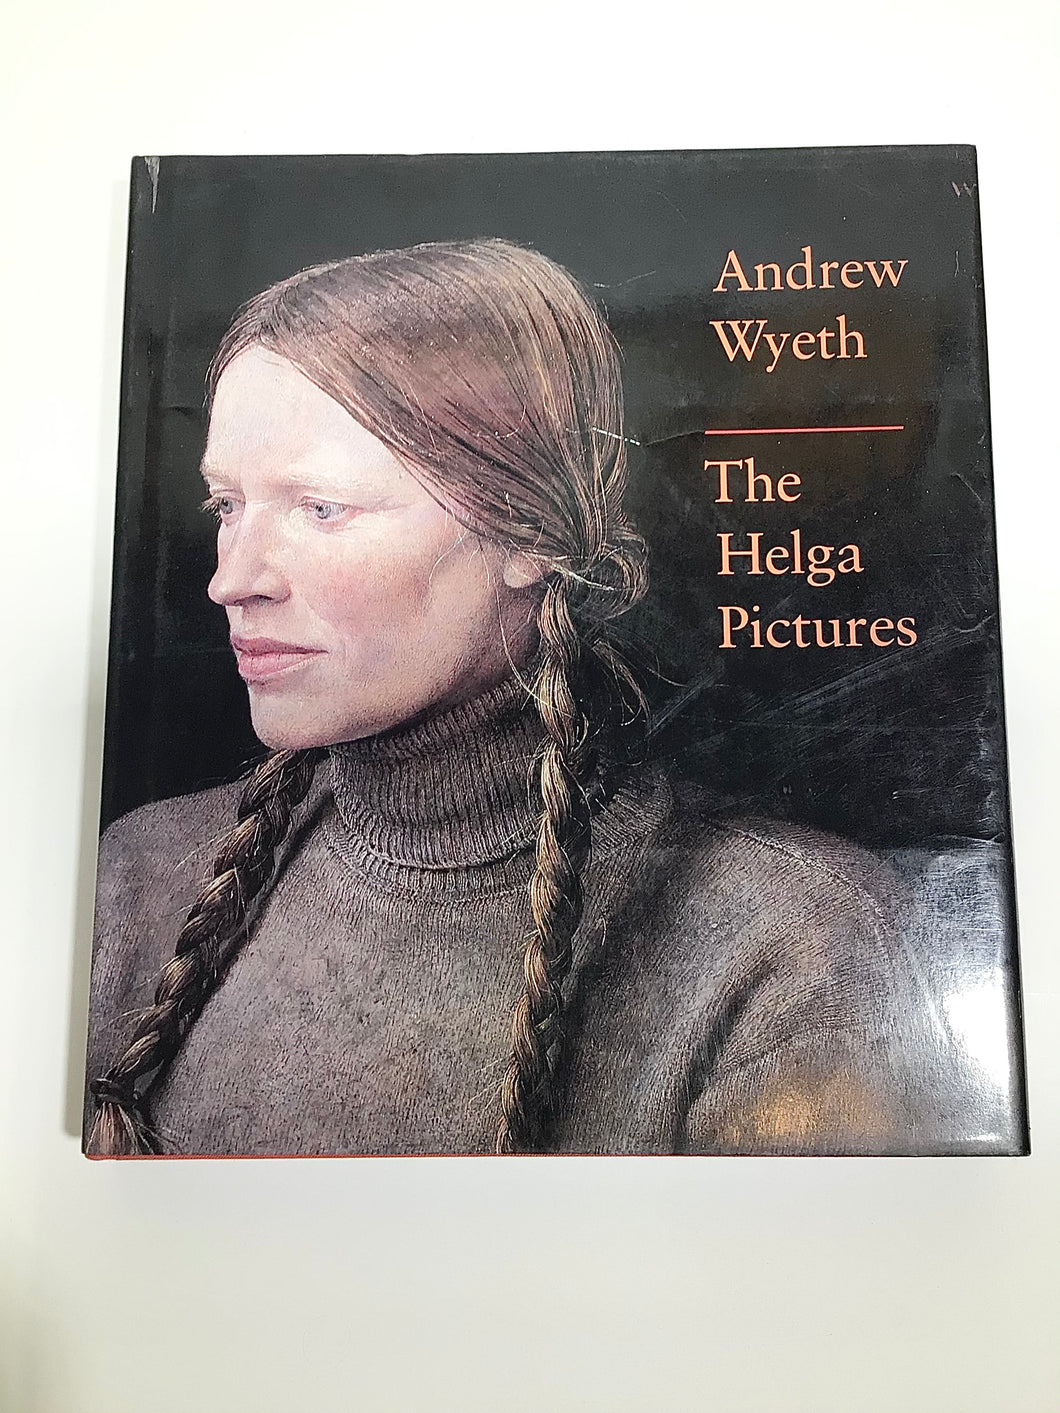 Andrew Wyeth “The Helga Pictures” Book 1987 by Wilmerding